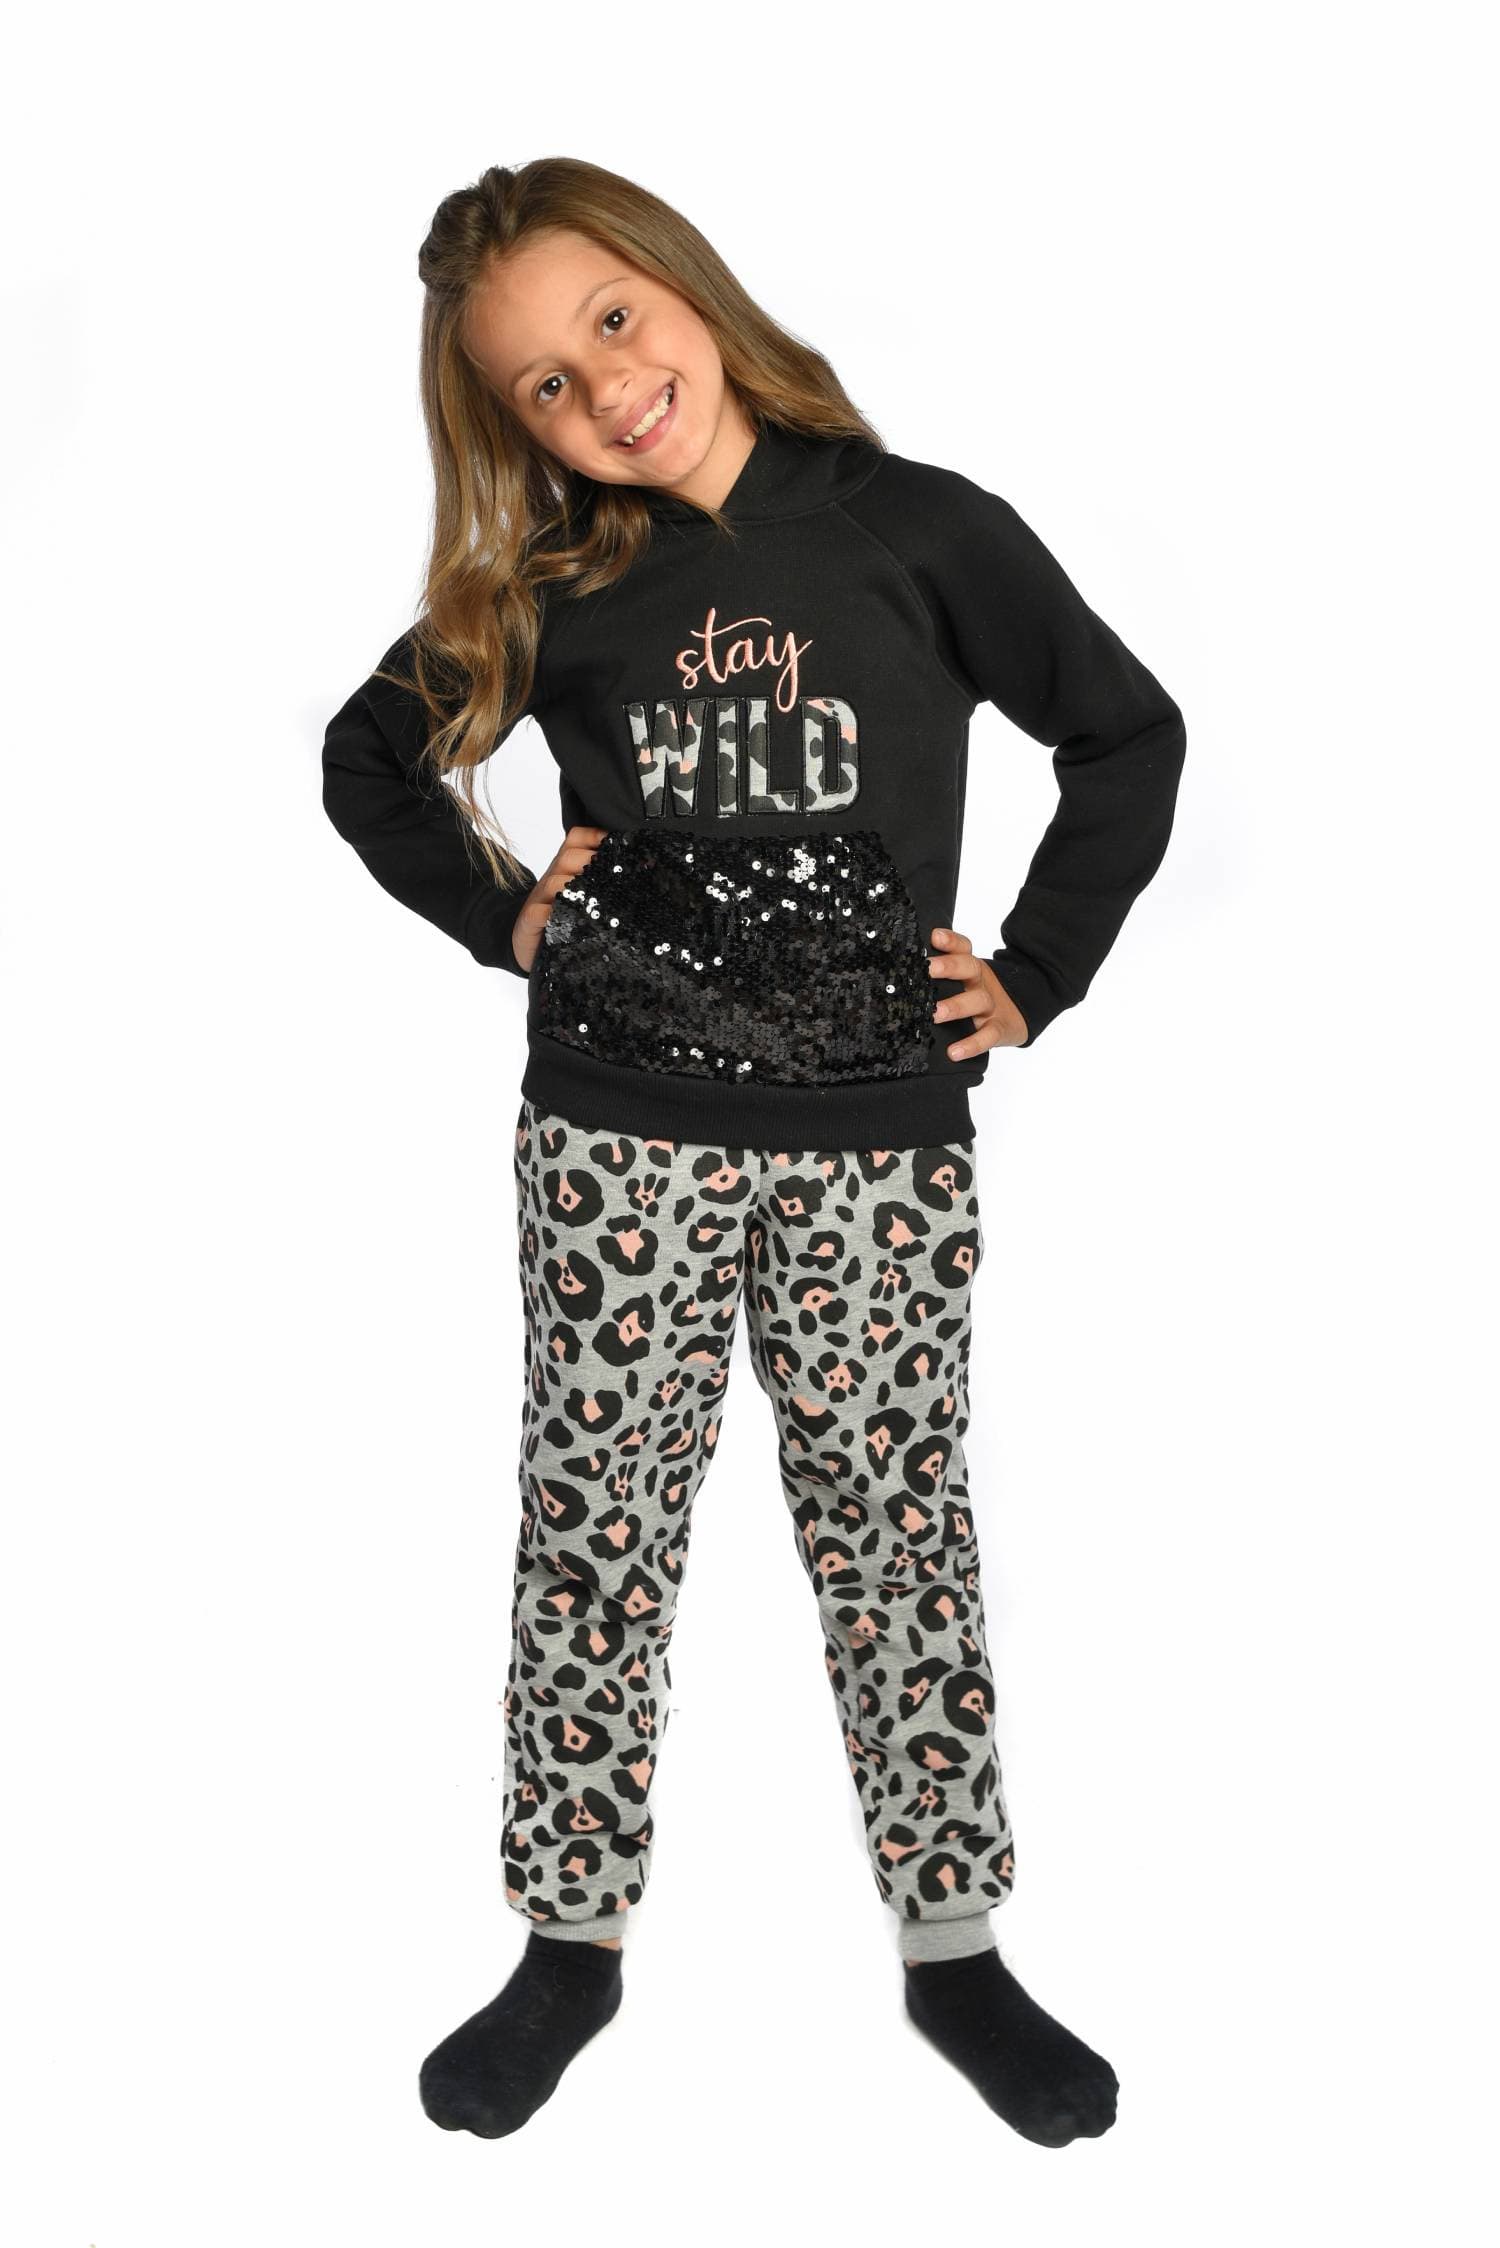 Winter girl's pajamas with Stay Wild print - front view